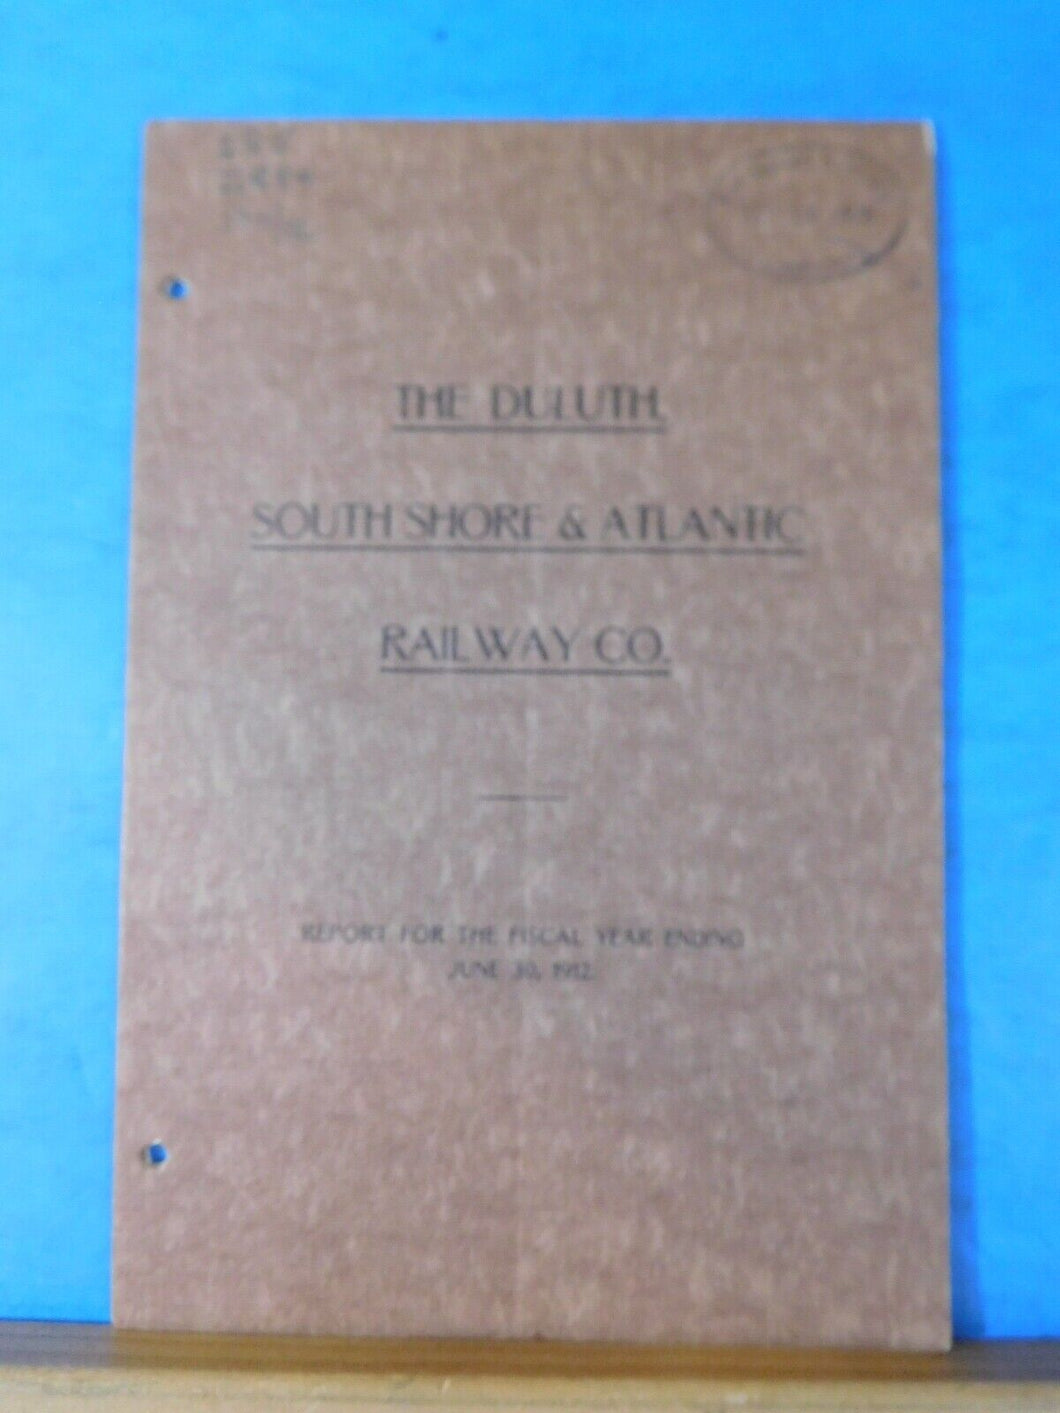 Duluth South Shore & Atlantic Railway Co Annual Report 1912